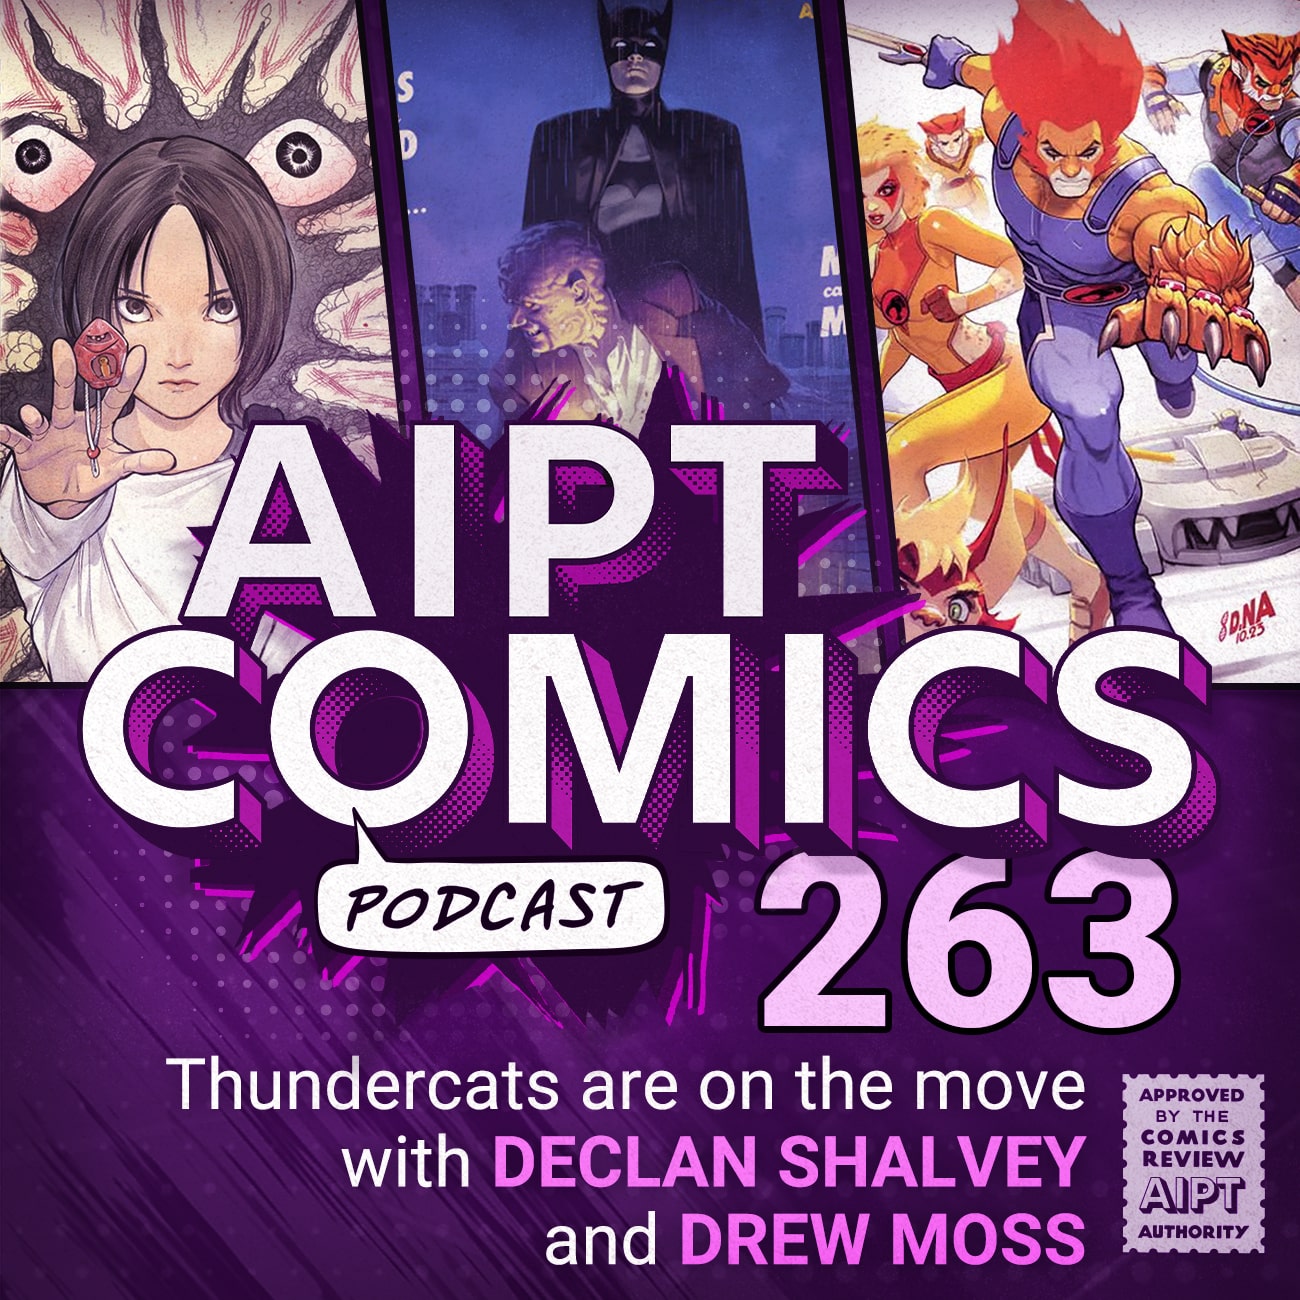 AIPT Comics Podcast Episode 263: Thundercats are on the move with Declan Shalvey and Drew Moss